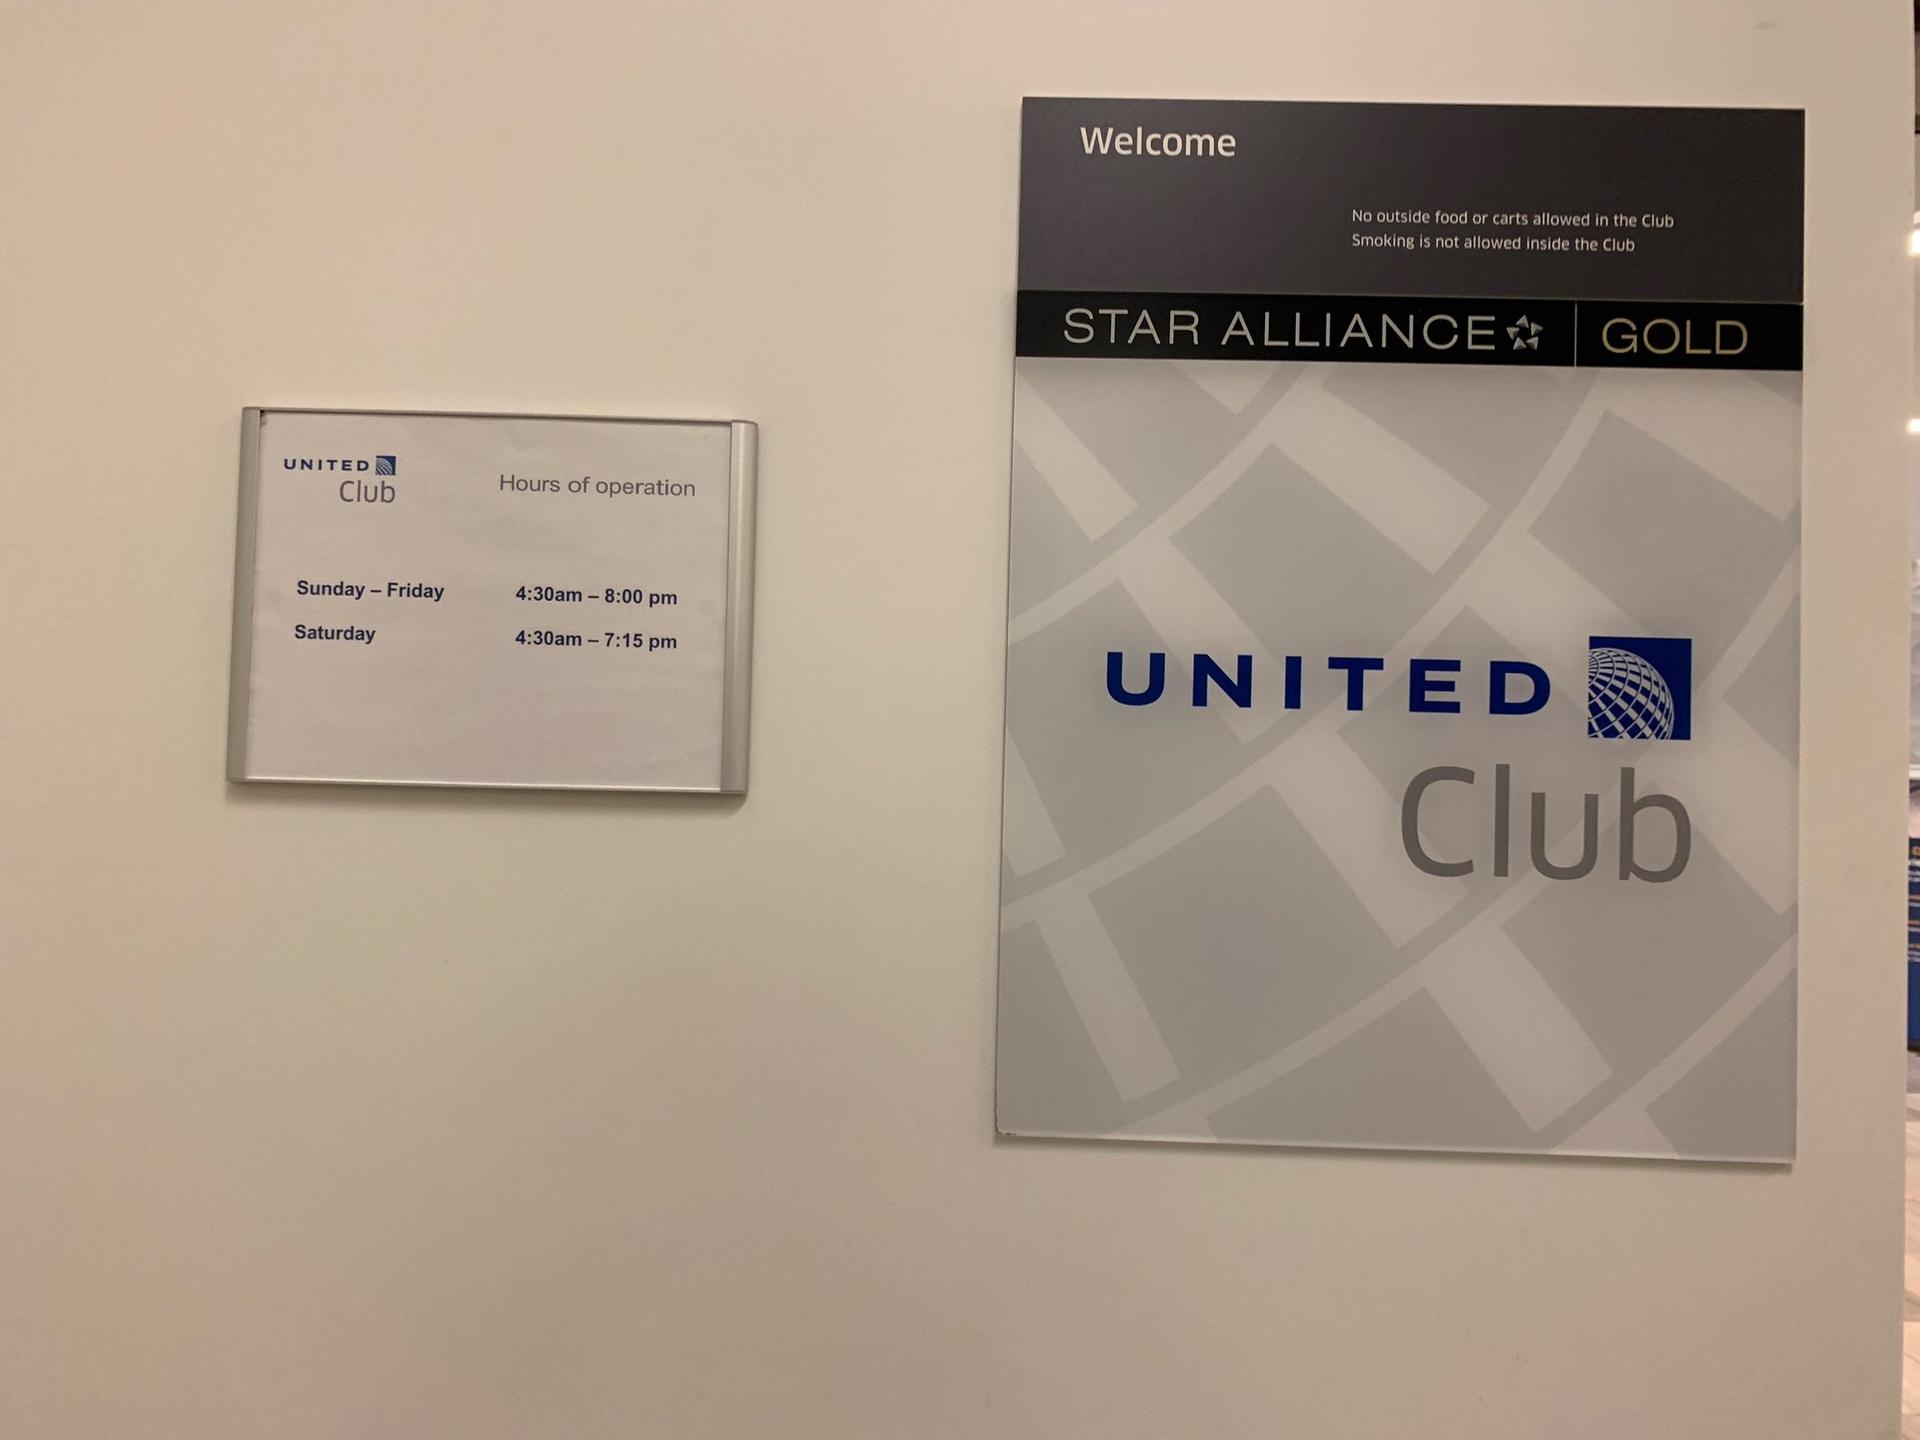 United Airlines United Club image 14 of 28